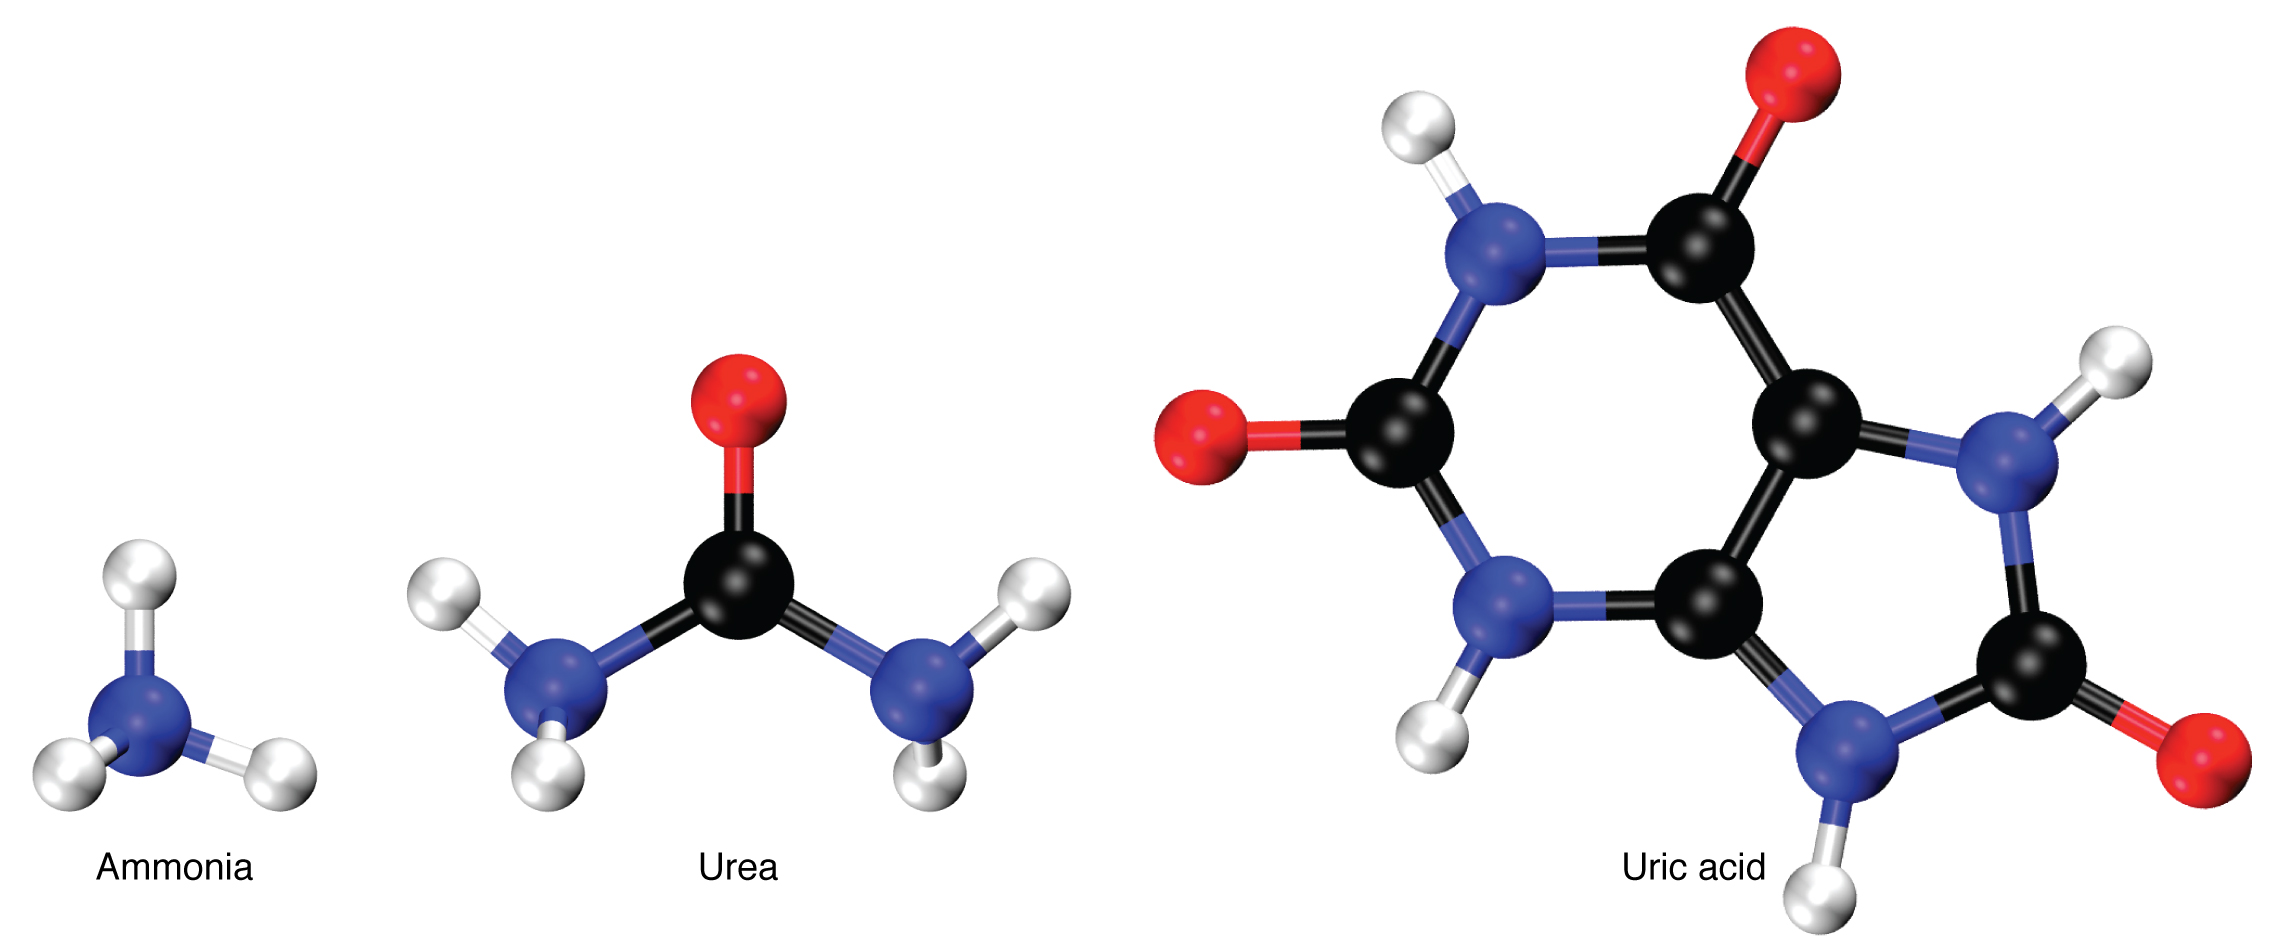 This figure shows the chemical structure of ammonia, urea, and uric acid.